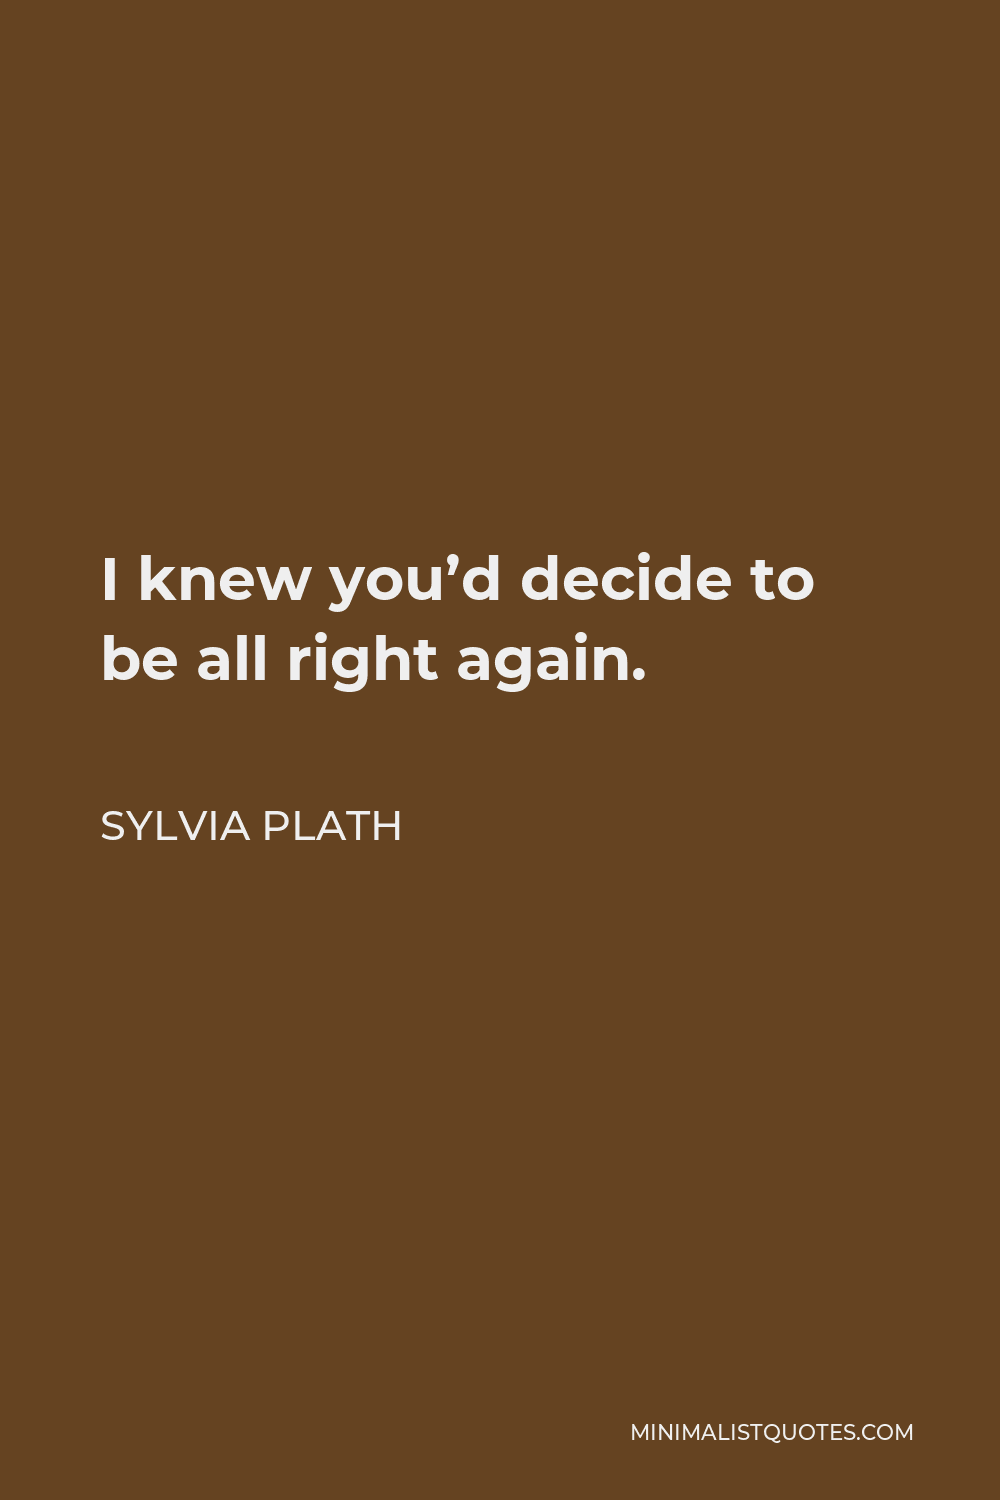 Sylvia Plath Quote - I knew you’d decide to be all right again.